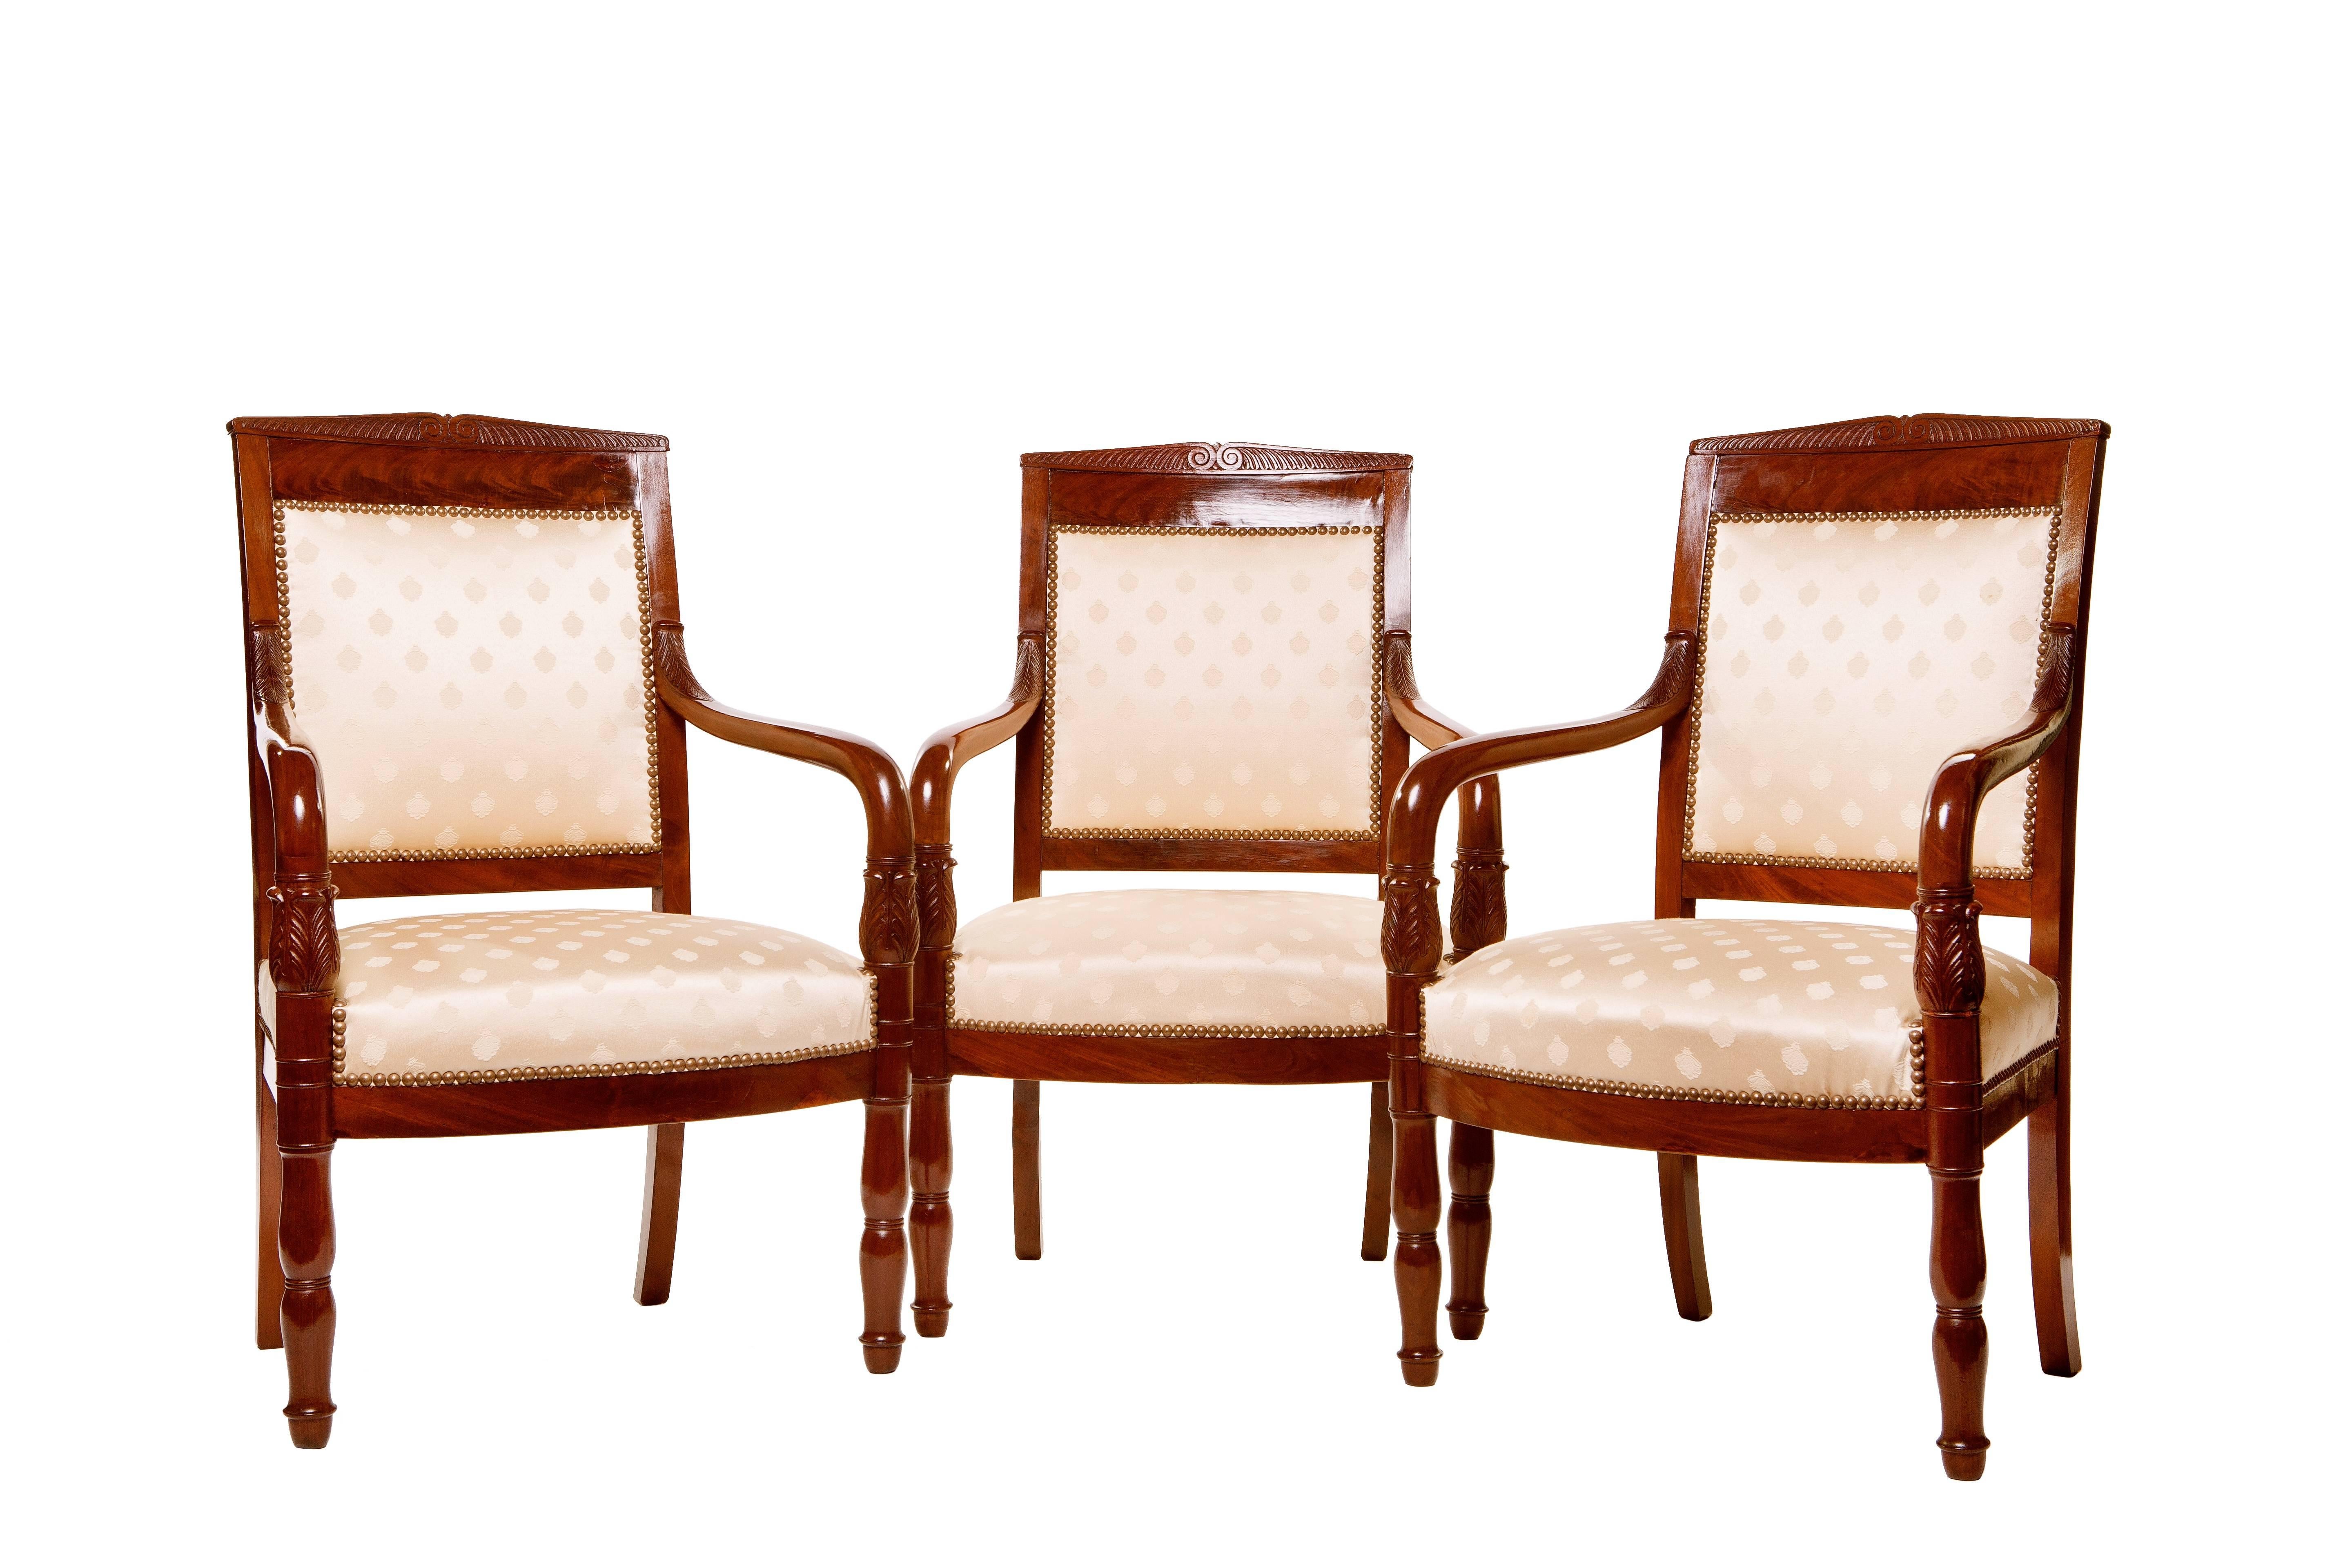 Fine Suite of Empire Carved Mahogany Seat Furniture  In Good Condition For Sale In Dallas, TX